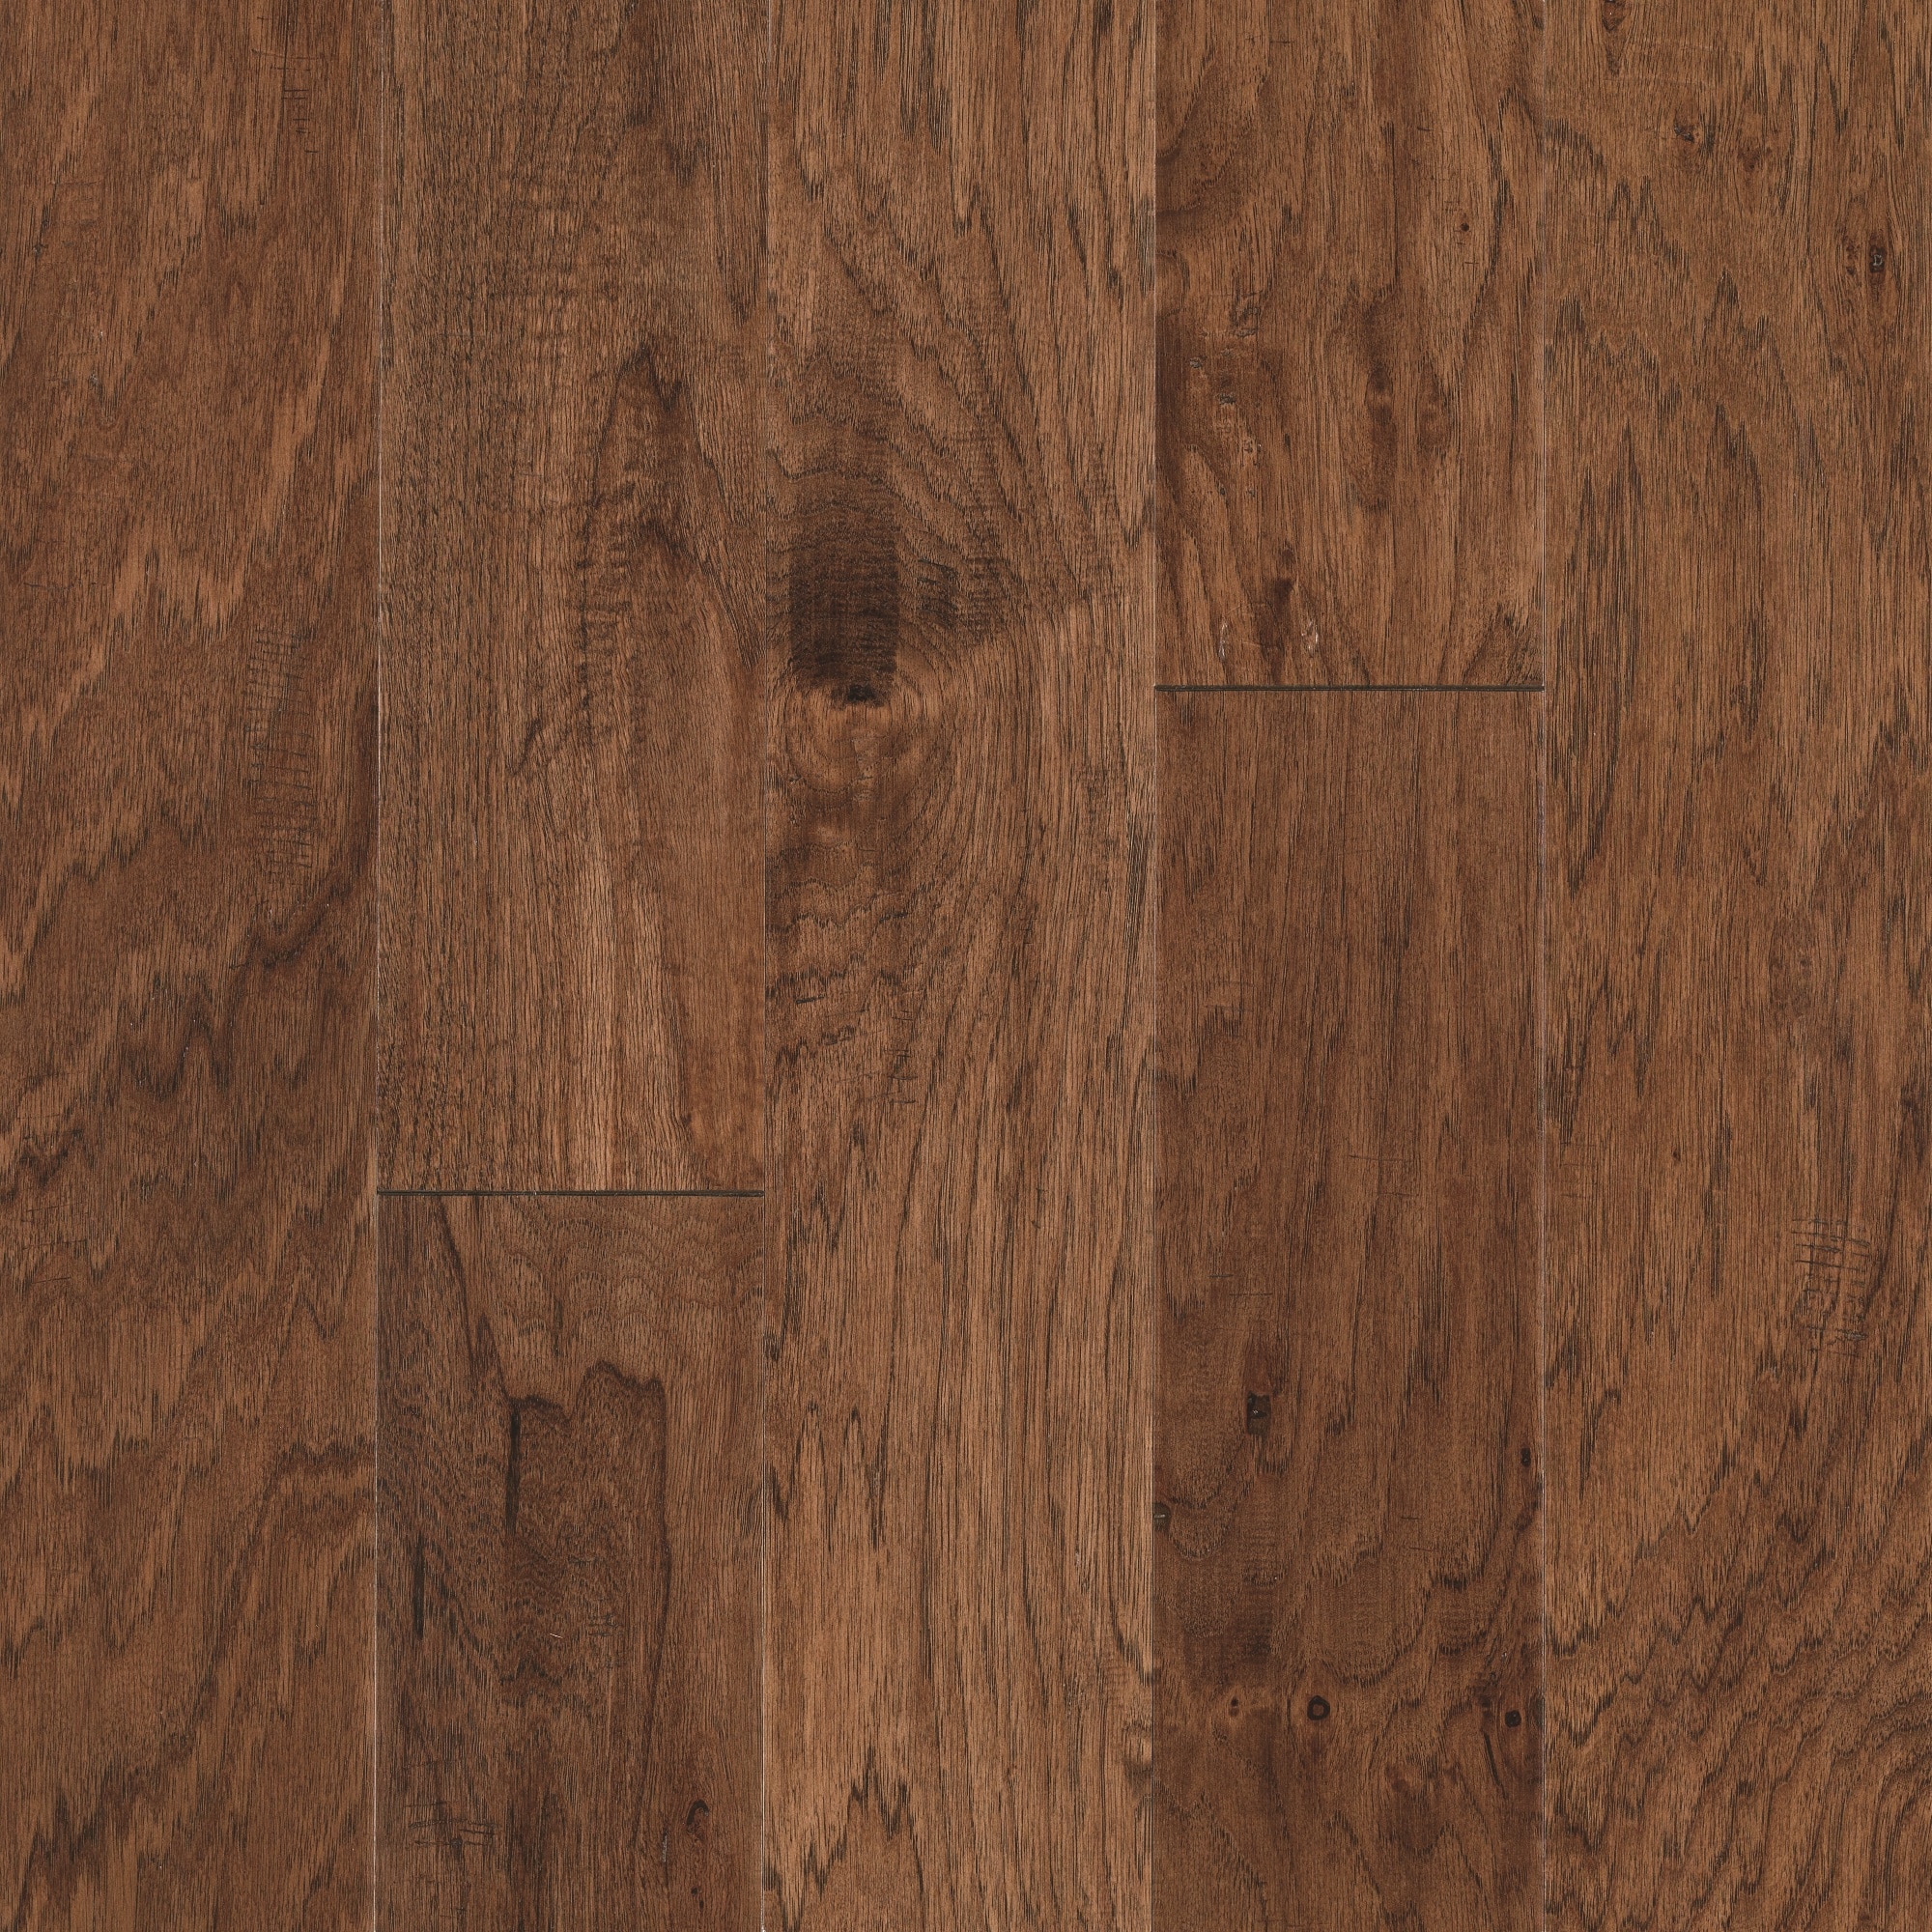 Pergo Max Chestnut Brown Hickory 5 1 4, Style Selections Chestnut Hickory Laminate Flooring